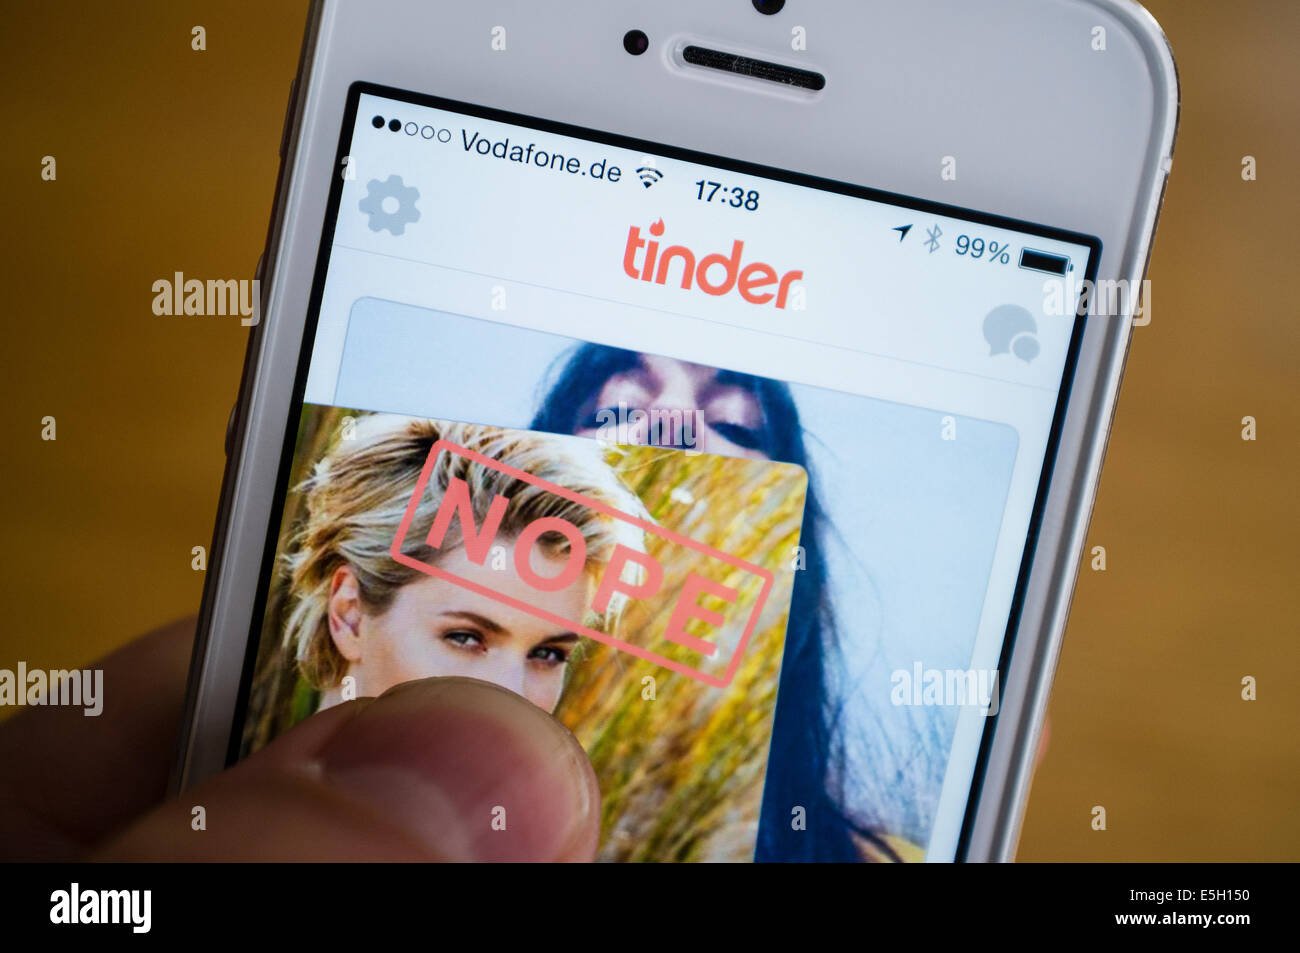 Tinder online dating app on iPhone smart phone Stock Photo